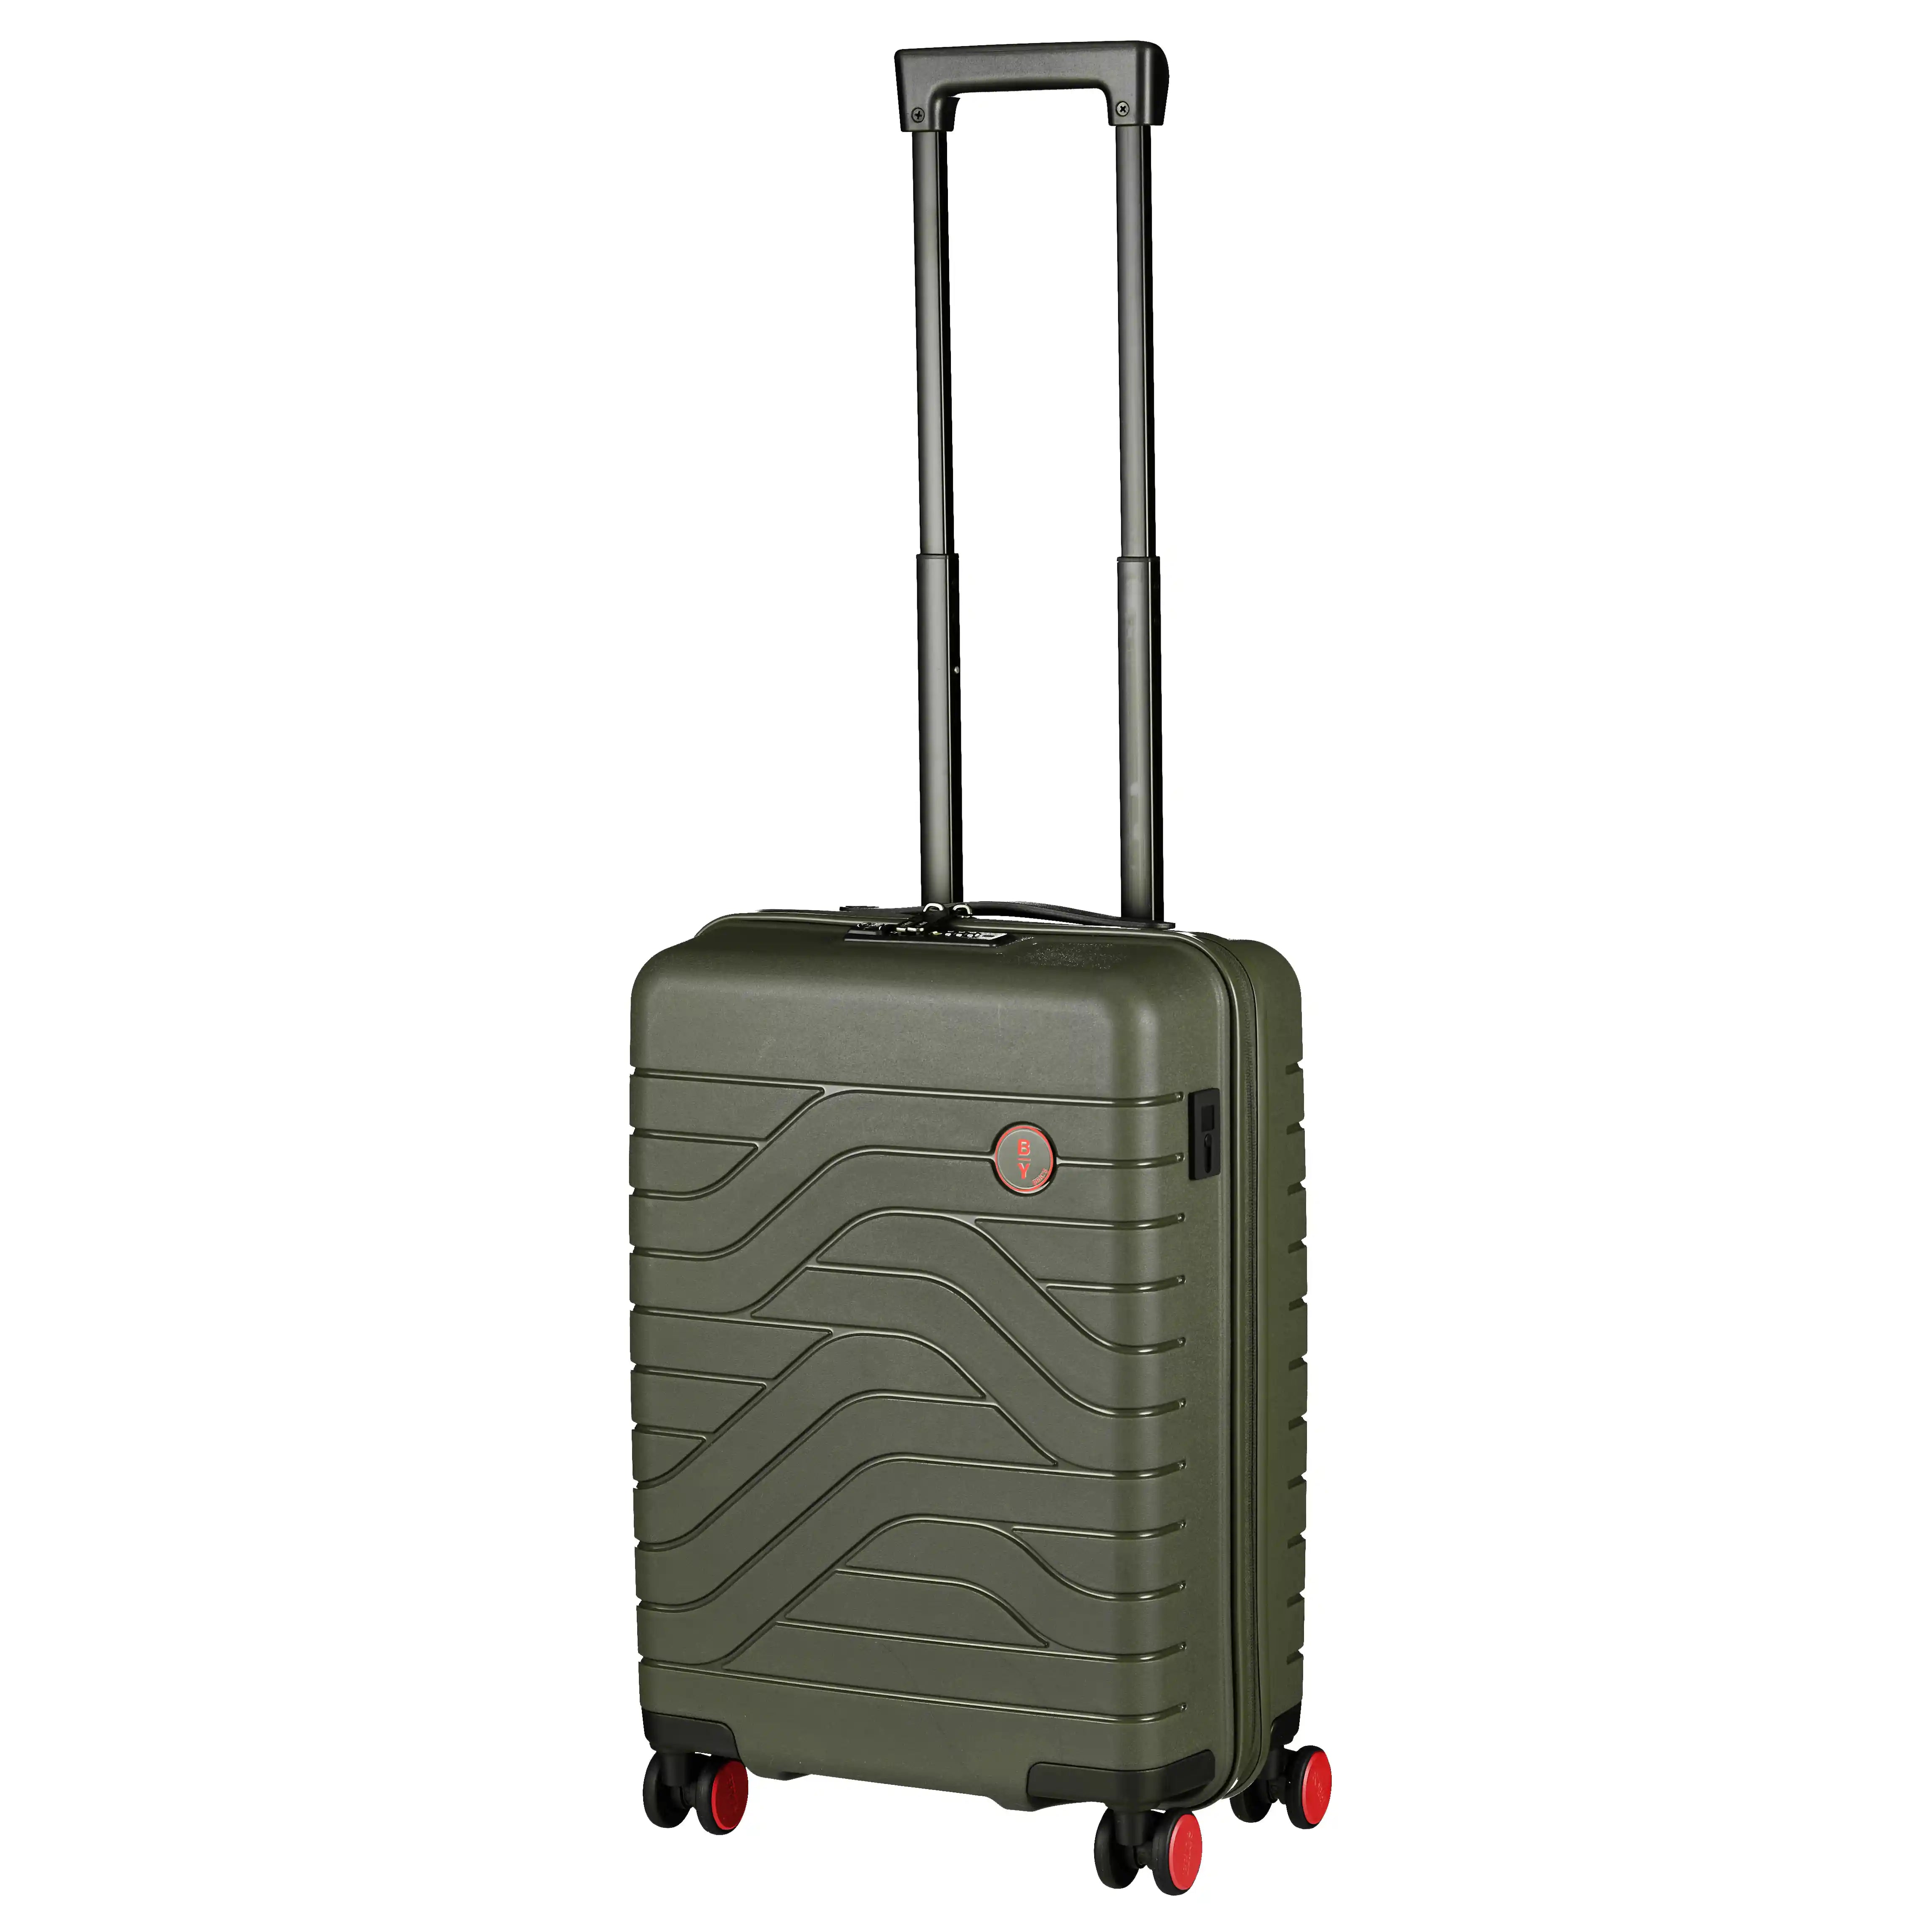 BY by Brics Ulisse 4-Rollen Kabinentrolley 55 cm - Olive